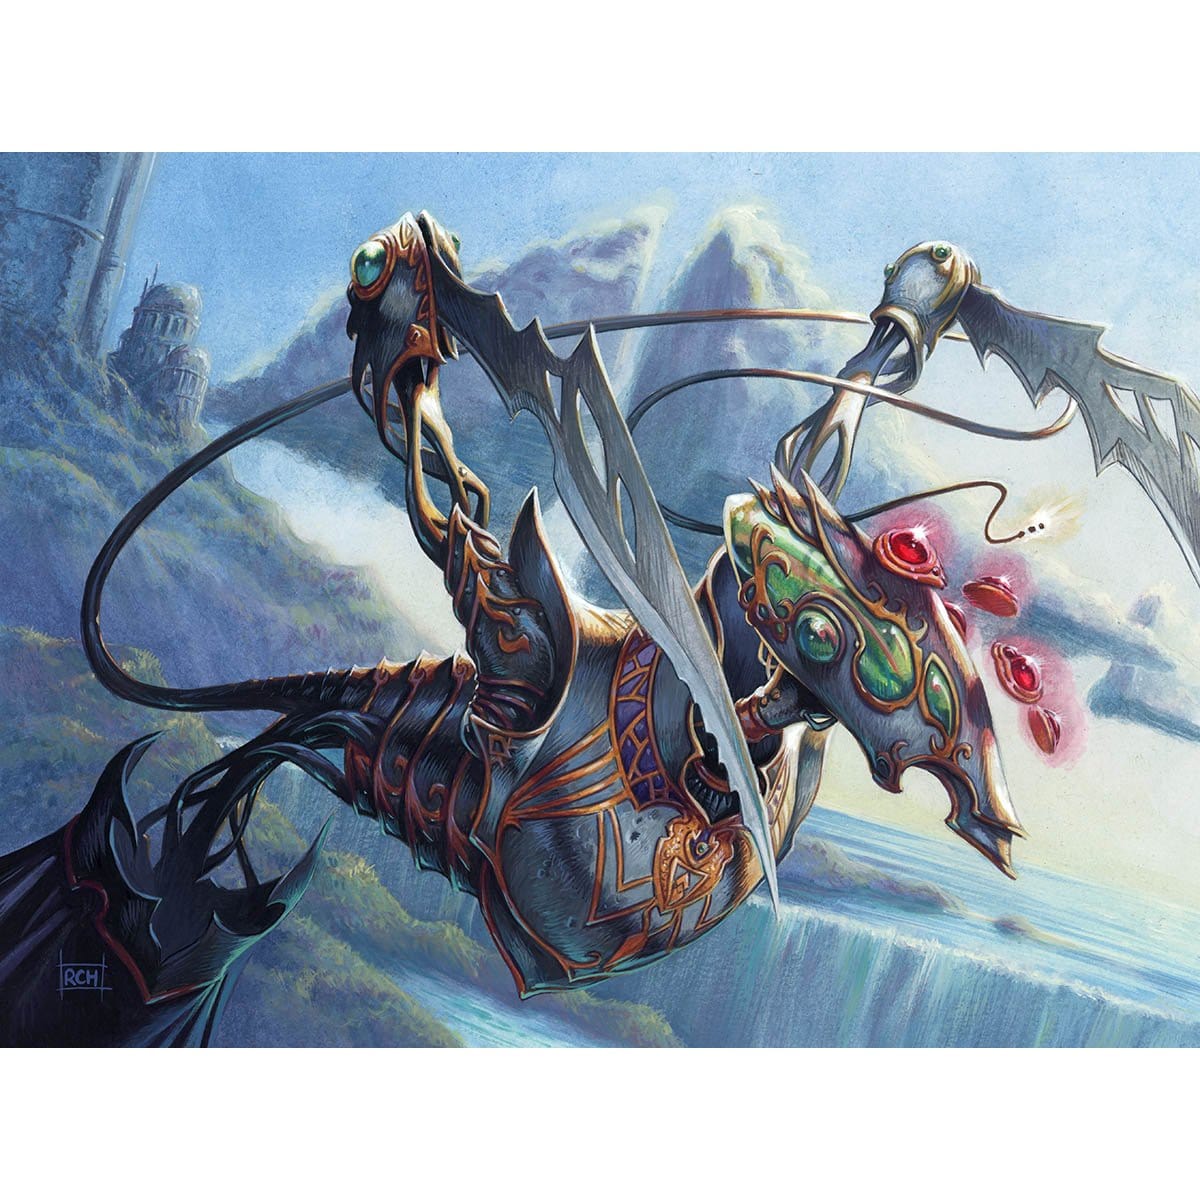 Arsenal Thresher Print - Print - Original Magic Art - Accessories for Magic the Gathering and other card games